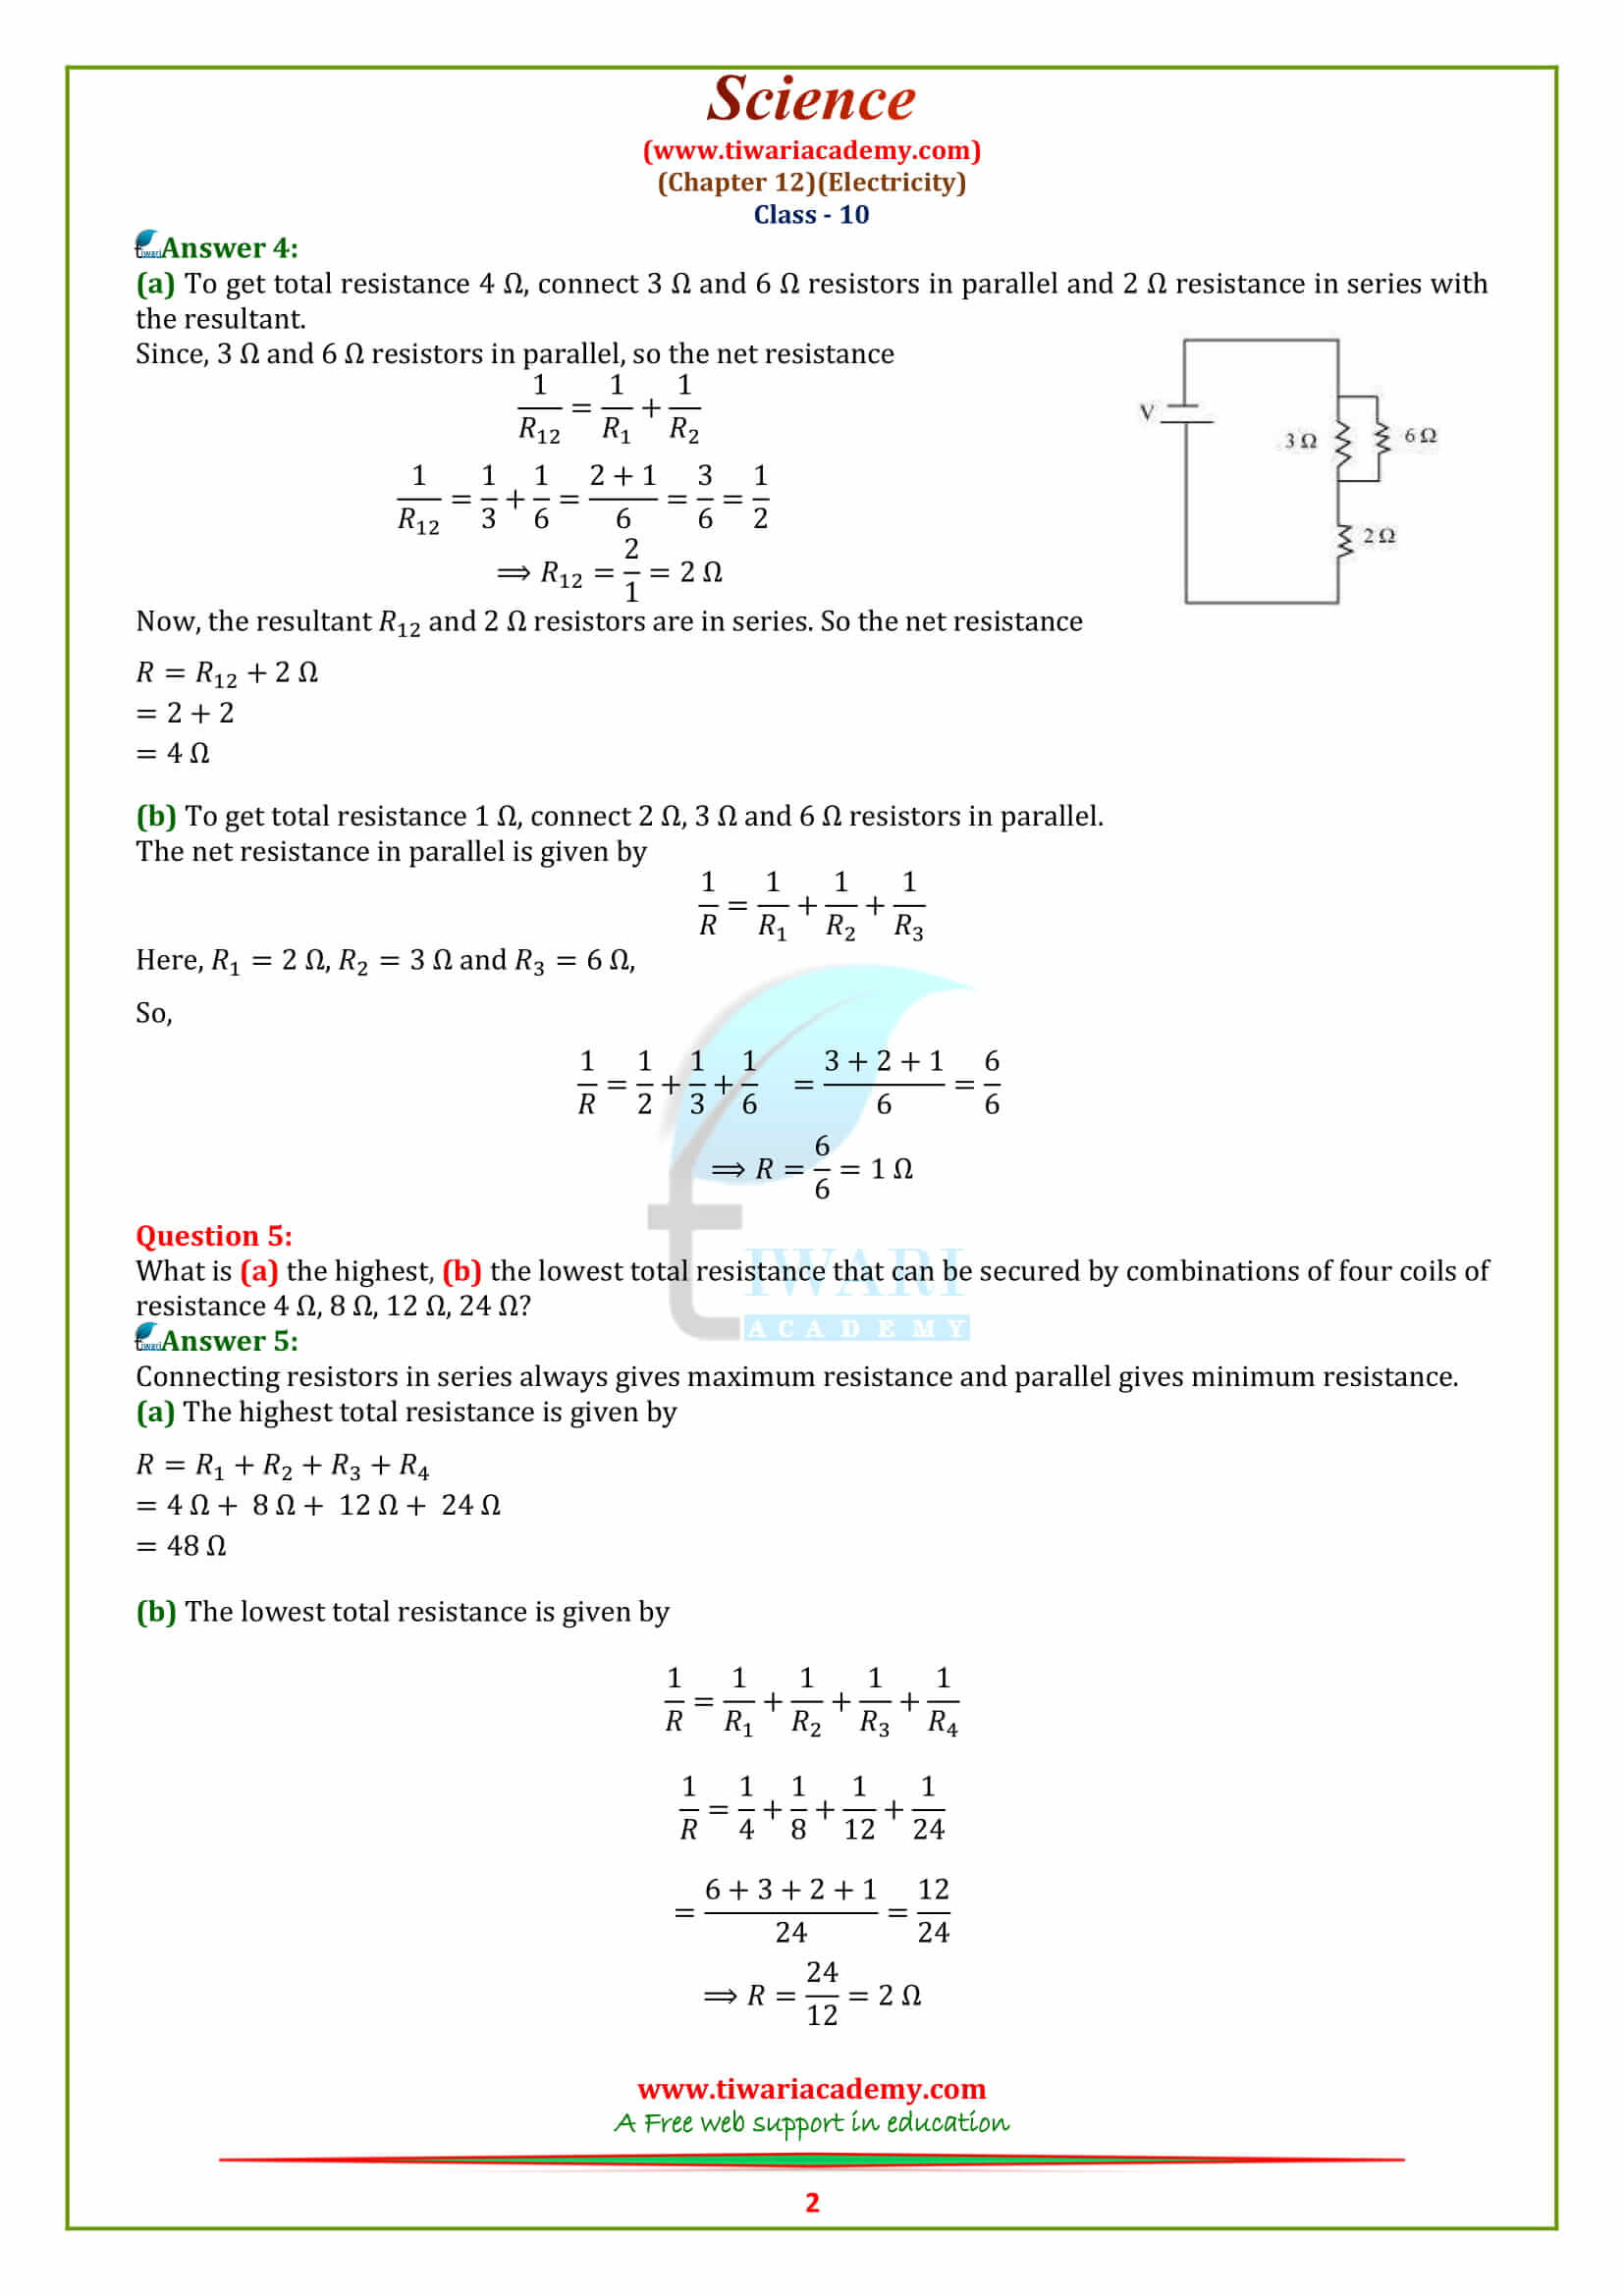 NCERT Solutions for Class 10 Science Chapter 12 Electricity page 216 in english medium pdf